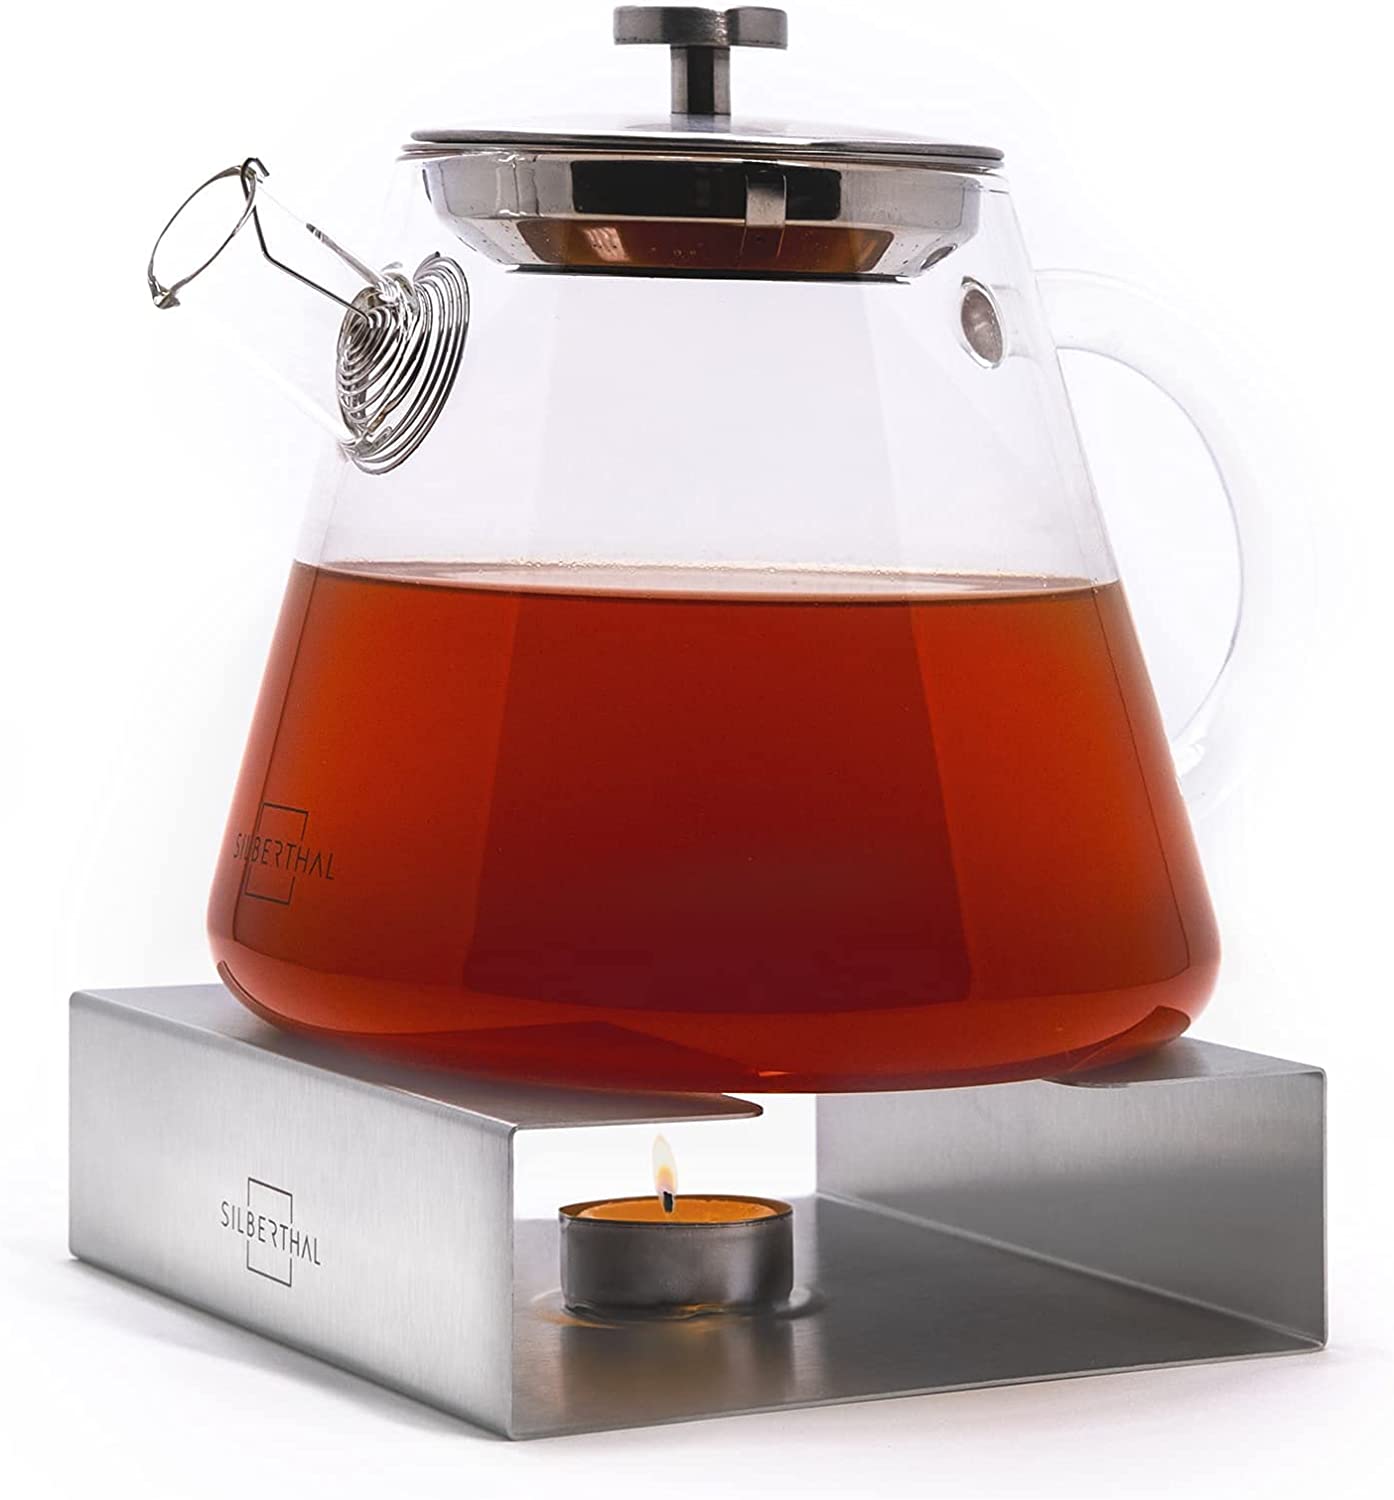 SILBERTHAL Teapot with Teapot Warmer Set Glass - With Strainer Insert - 1.5 Litres - For Keeping The Teapot Warm with Tea Light